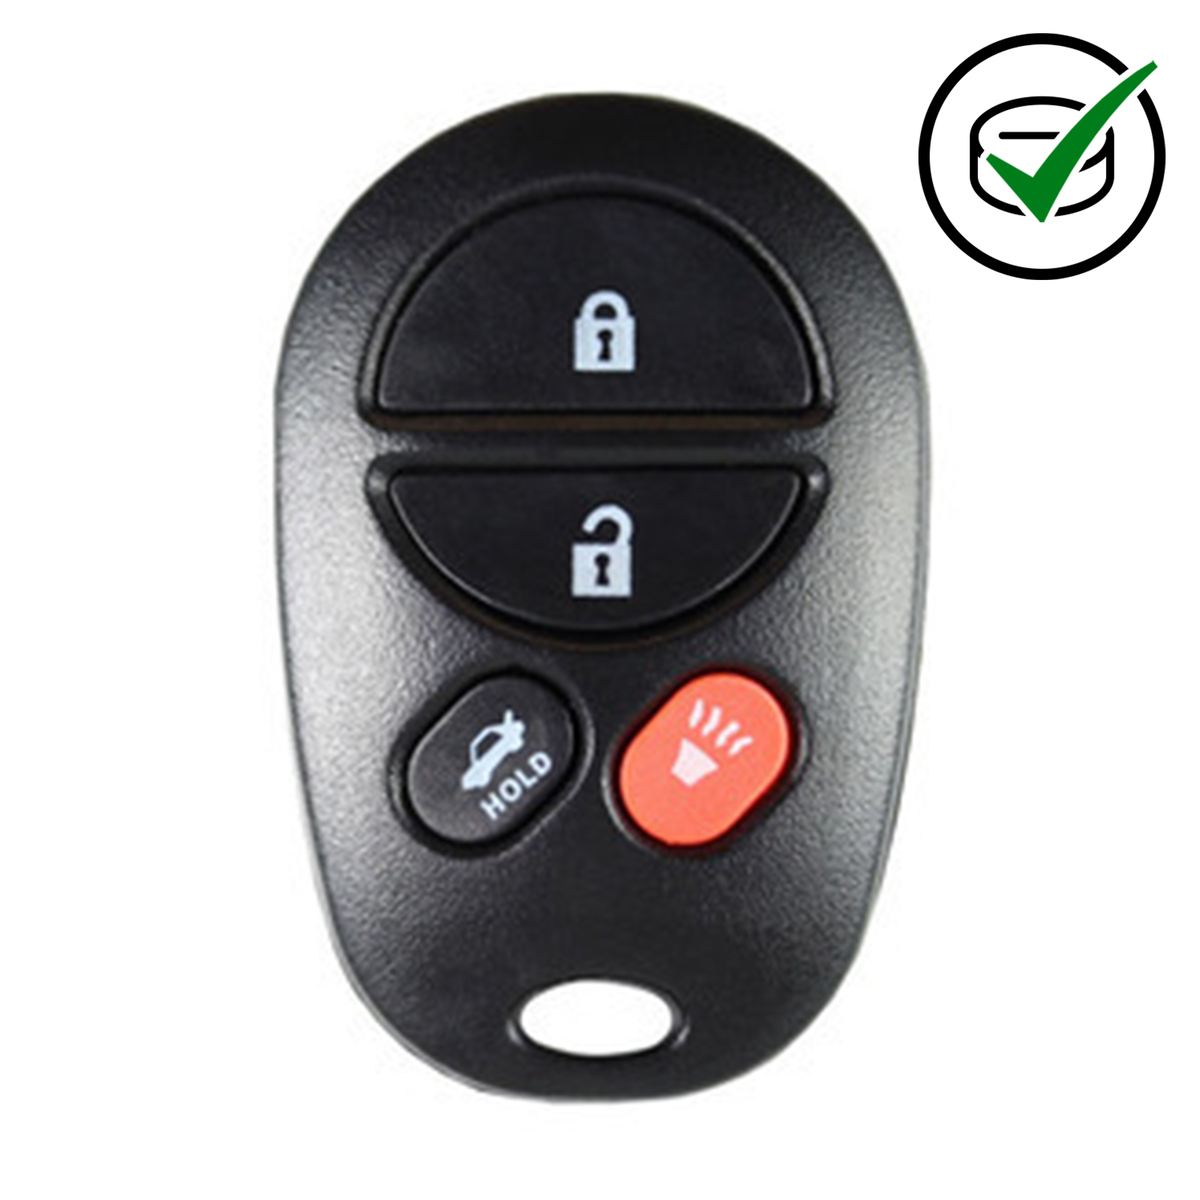 Toyota compatible 4 button remote 434MHz, suits Camry